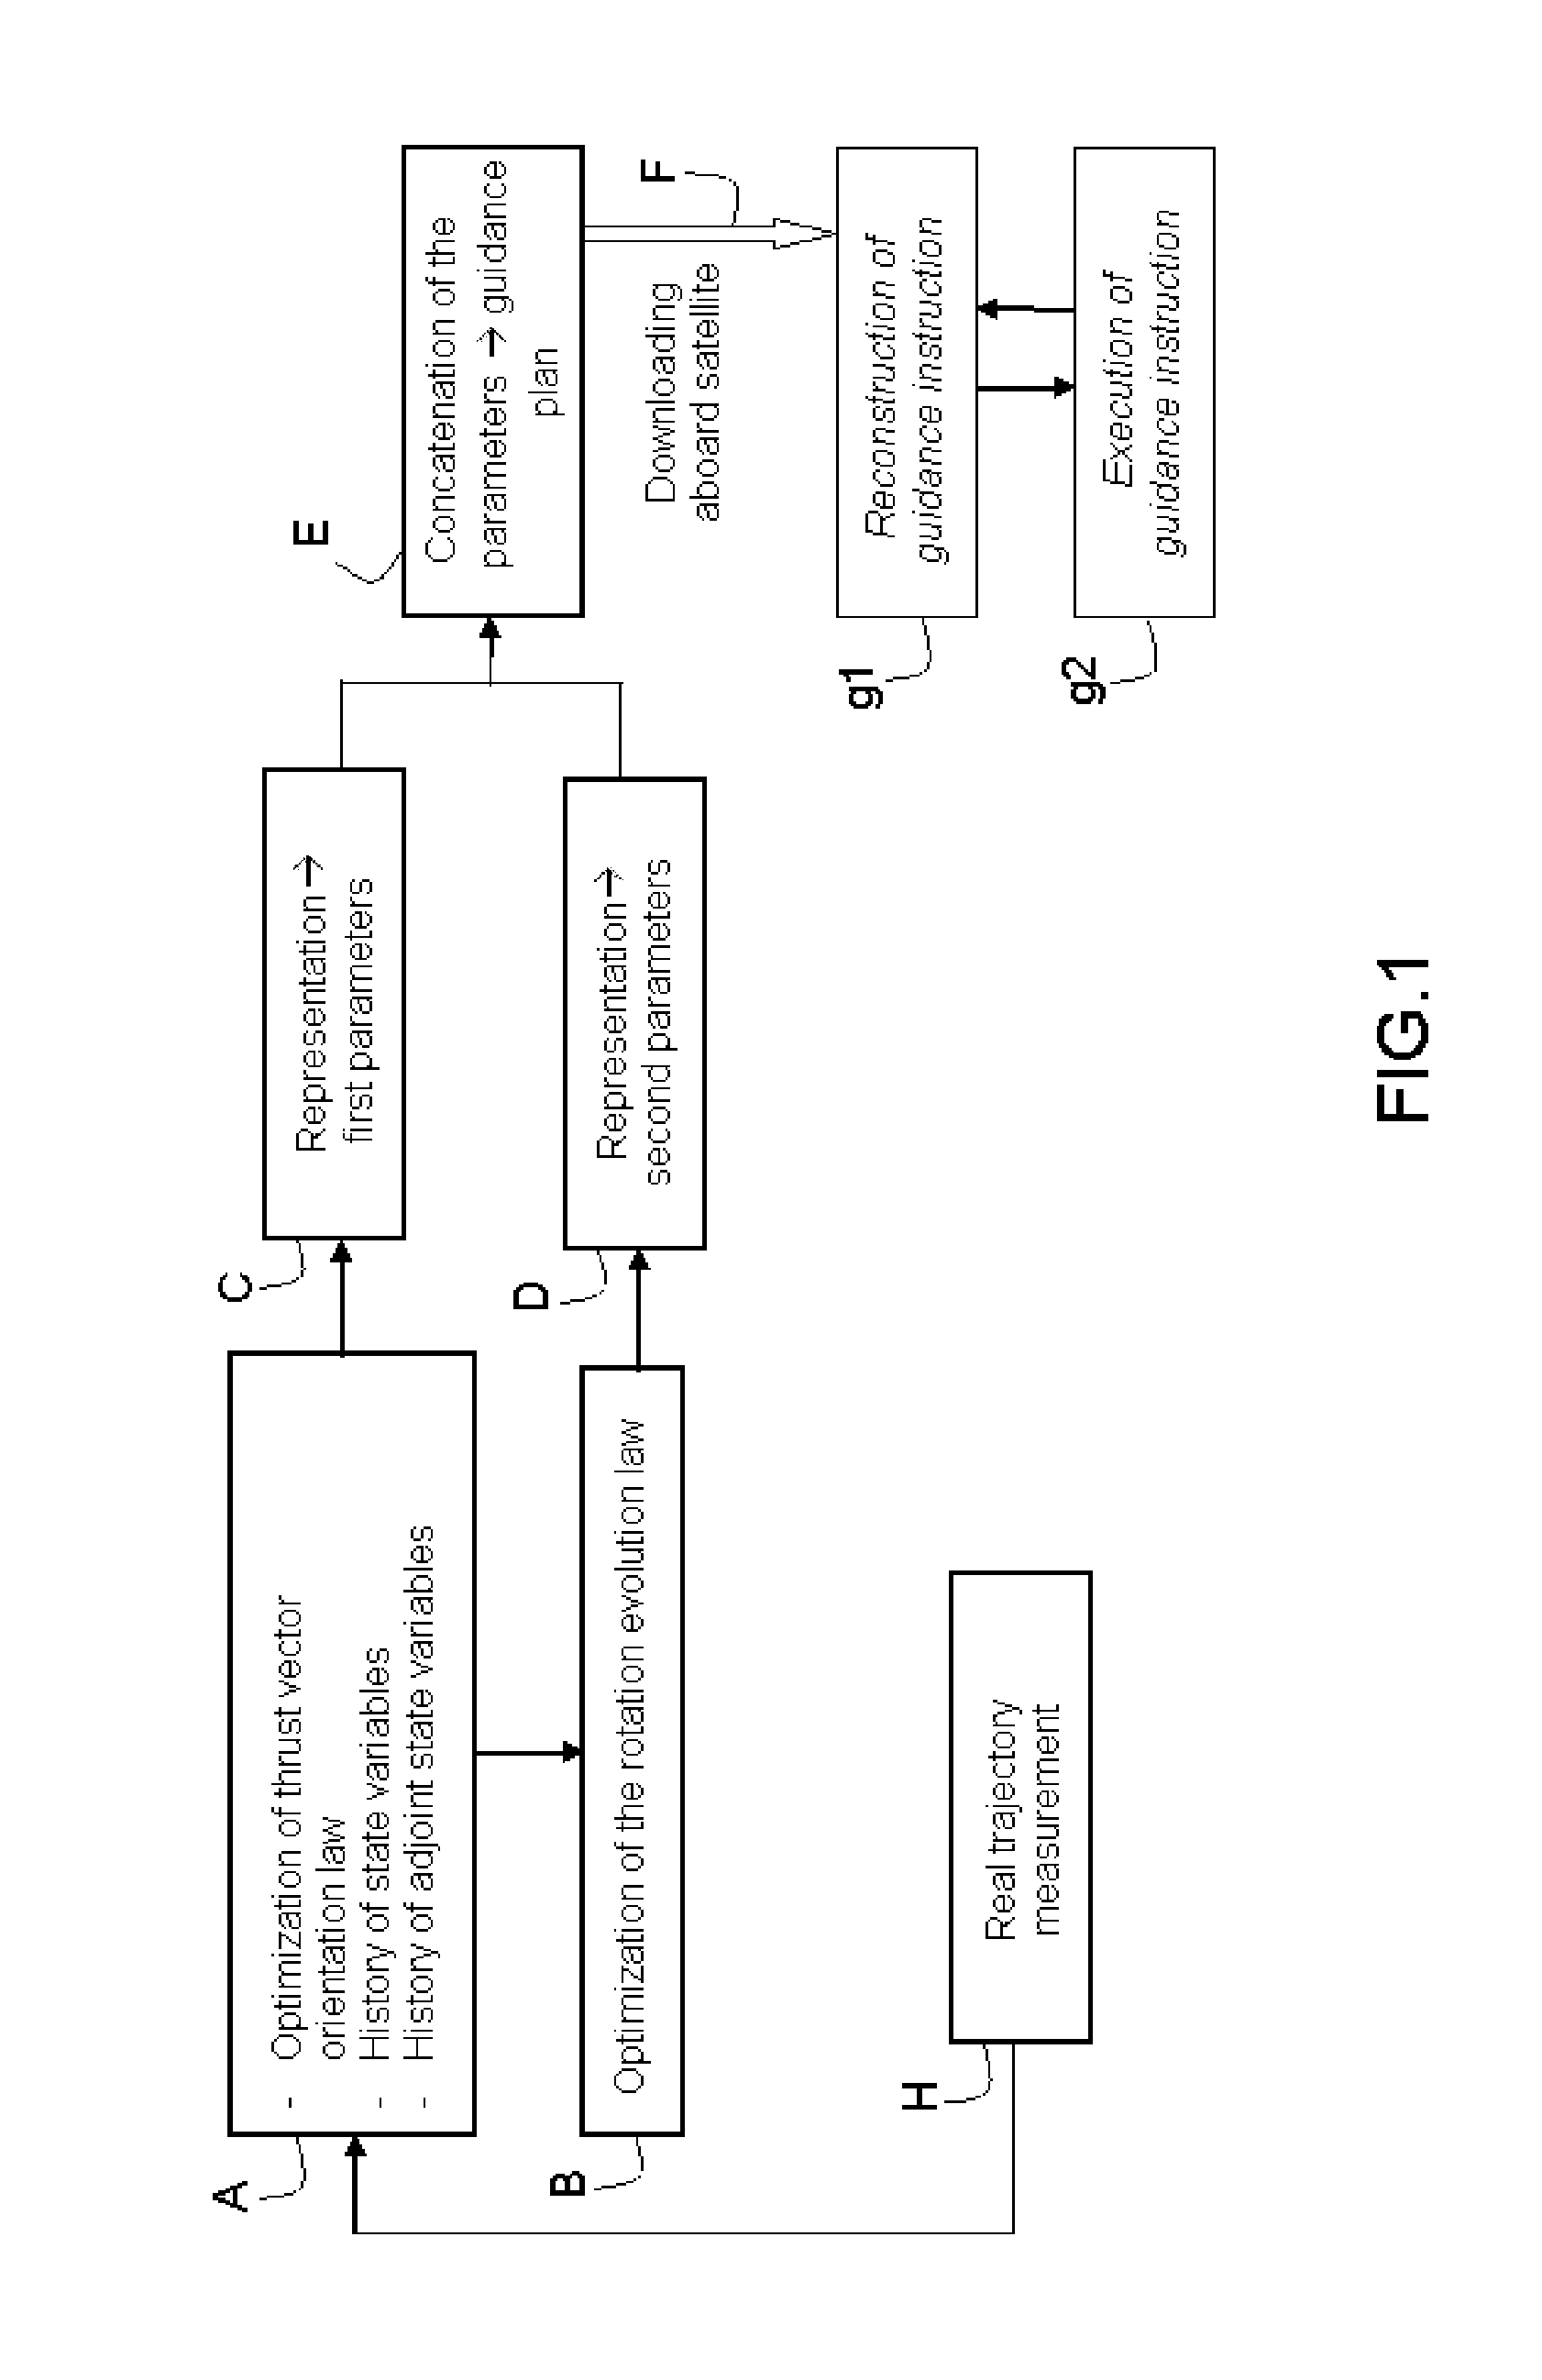 Method of guidance for placing a satellite on station